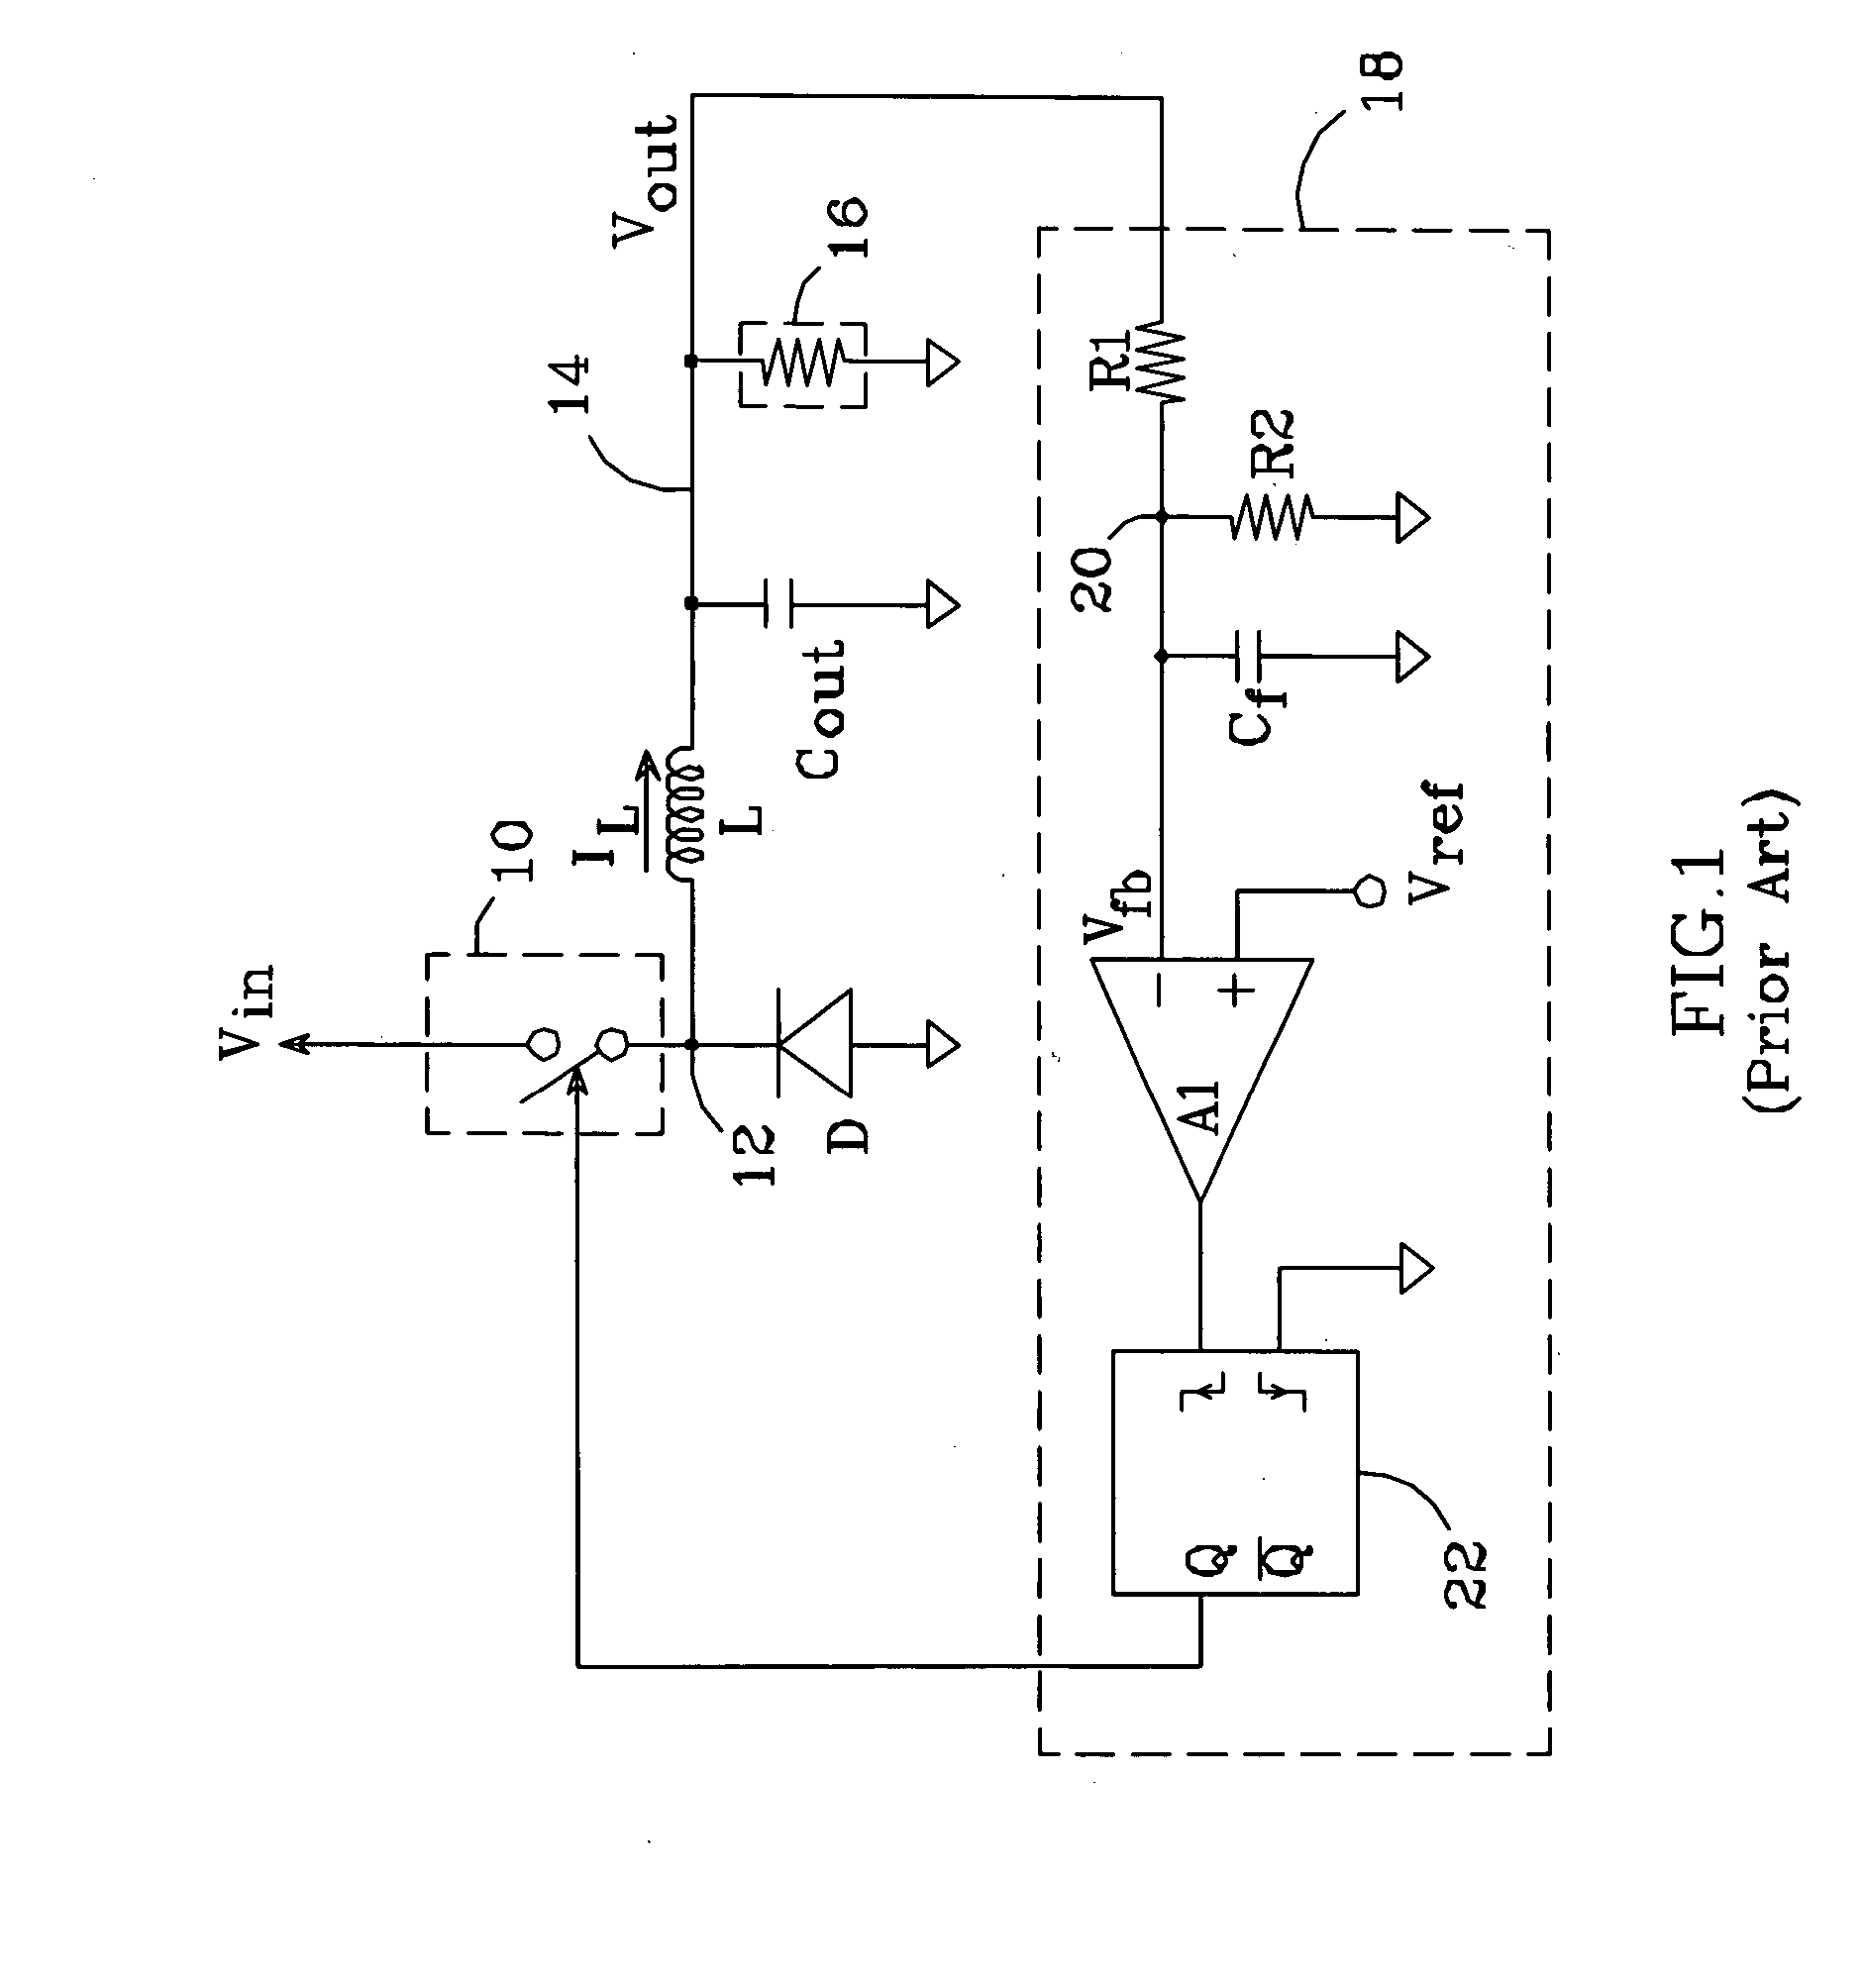 Switched noise filter circuit for a dc-dc converter